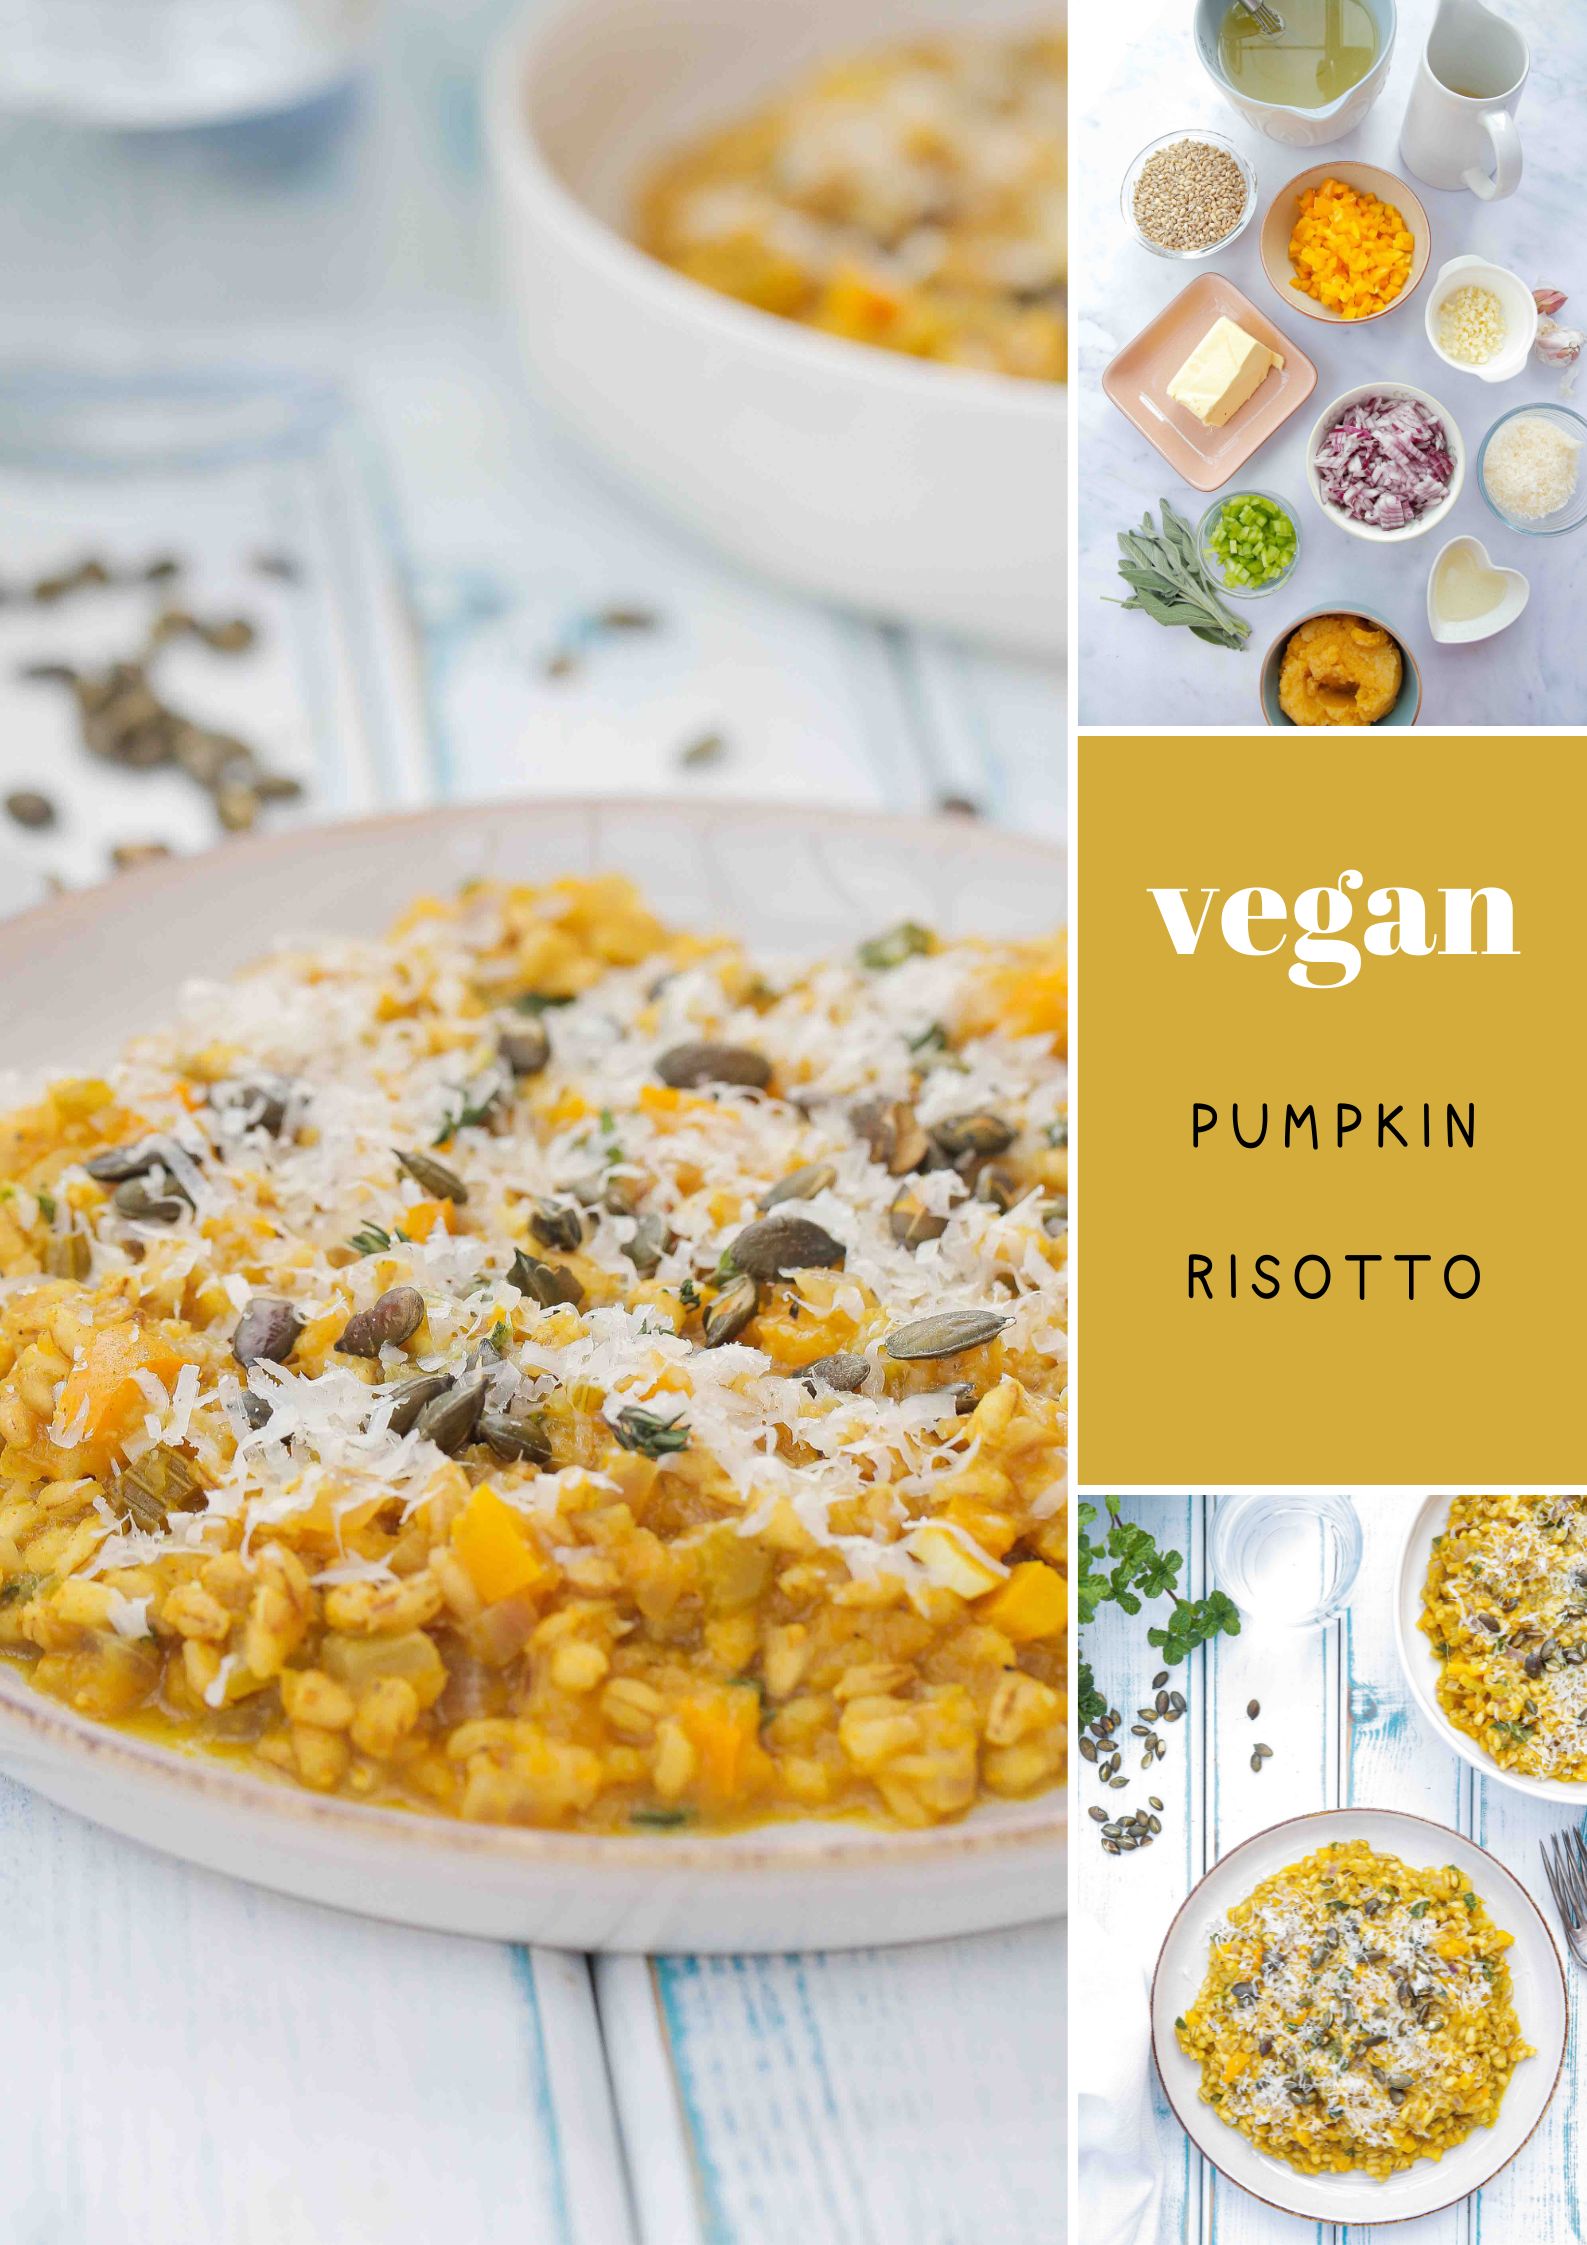 Easy, creamy, one pan pumpkin risotto with white wine, sage and pearl barley. Delicious autumn comfort food. Recipe on thecookandhim.com | #pumpkinrisotto #pearlbarley #vegan #autumnrecipes #comfortfoodrecipes #onepotrecipes #winterwarmerrecipes